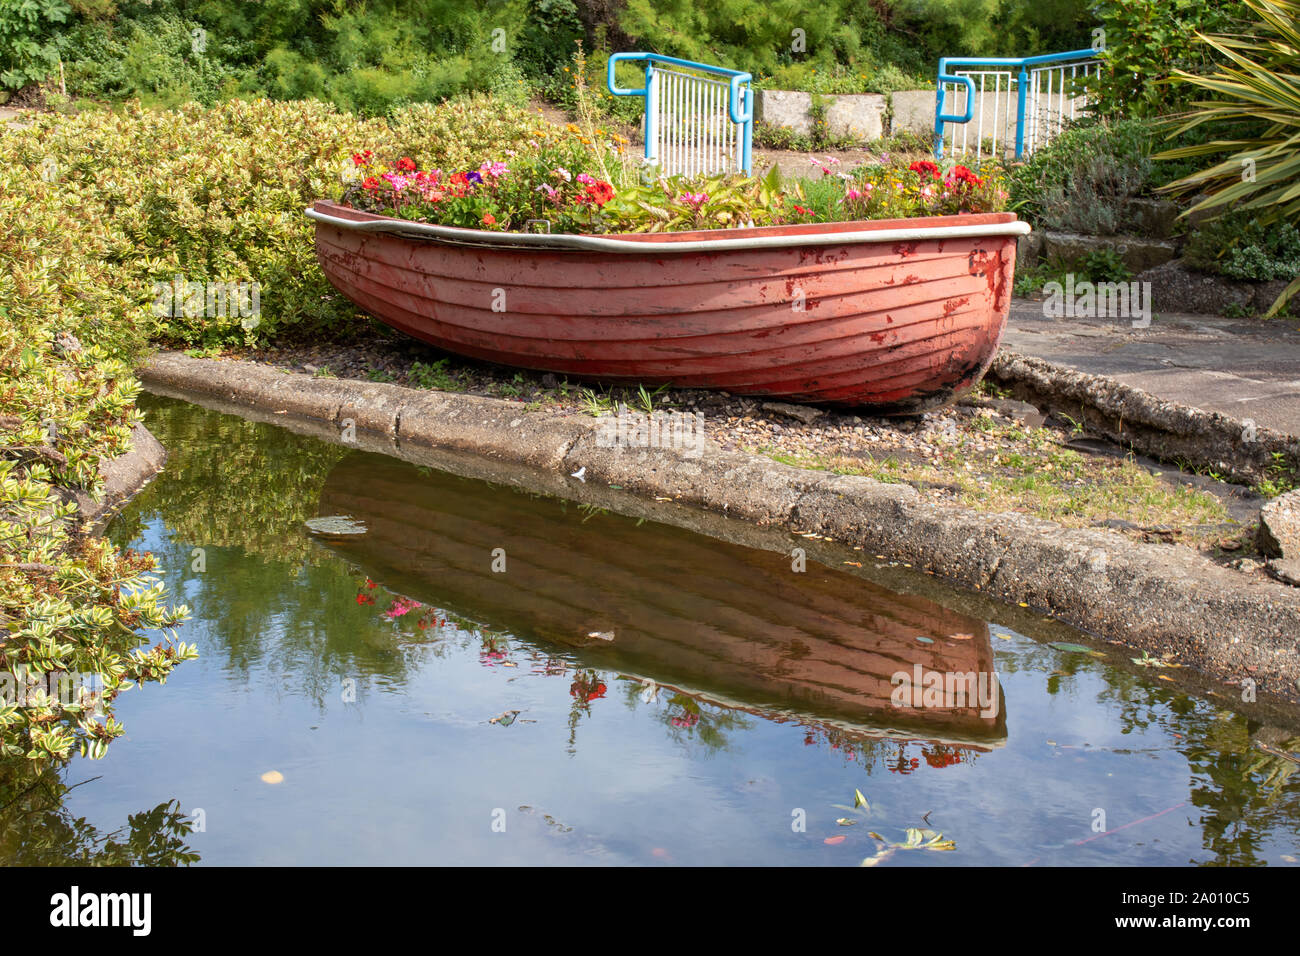 Flowerbed Boat and Reflection Stock Photo